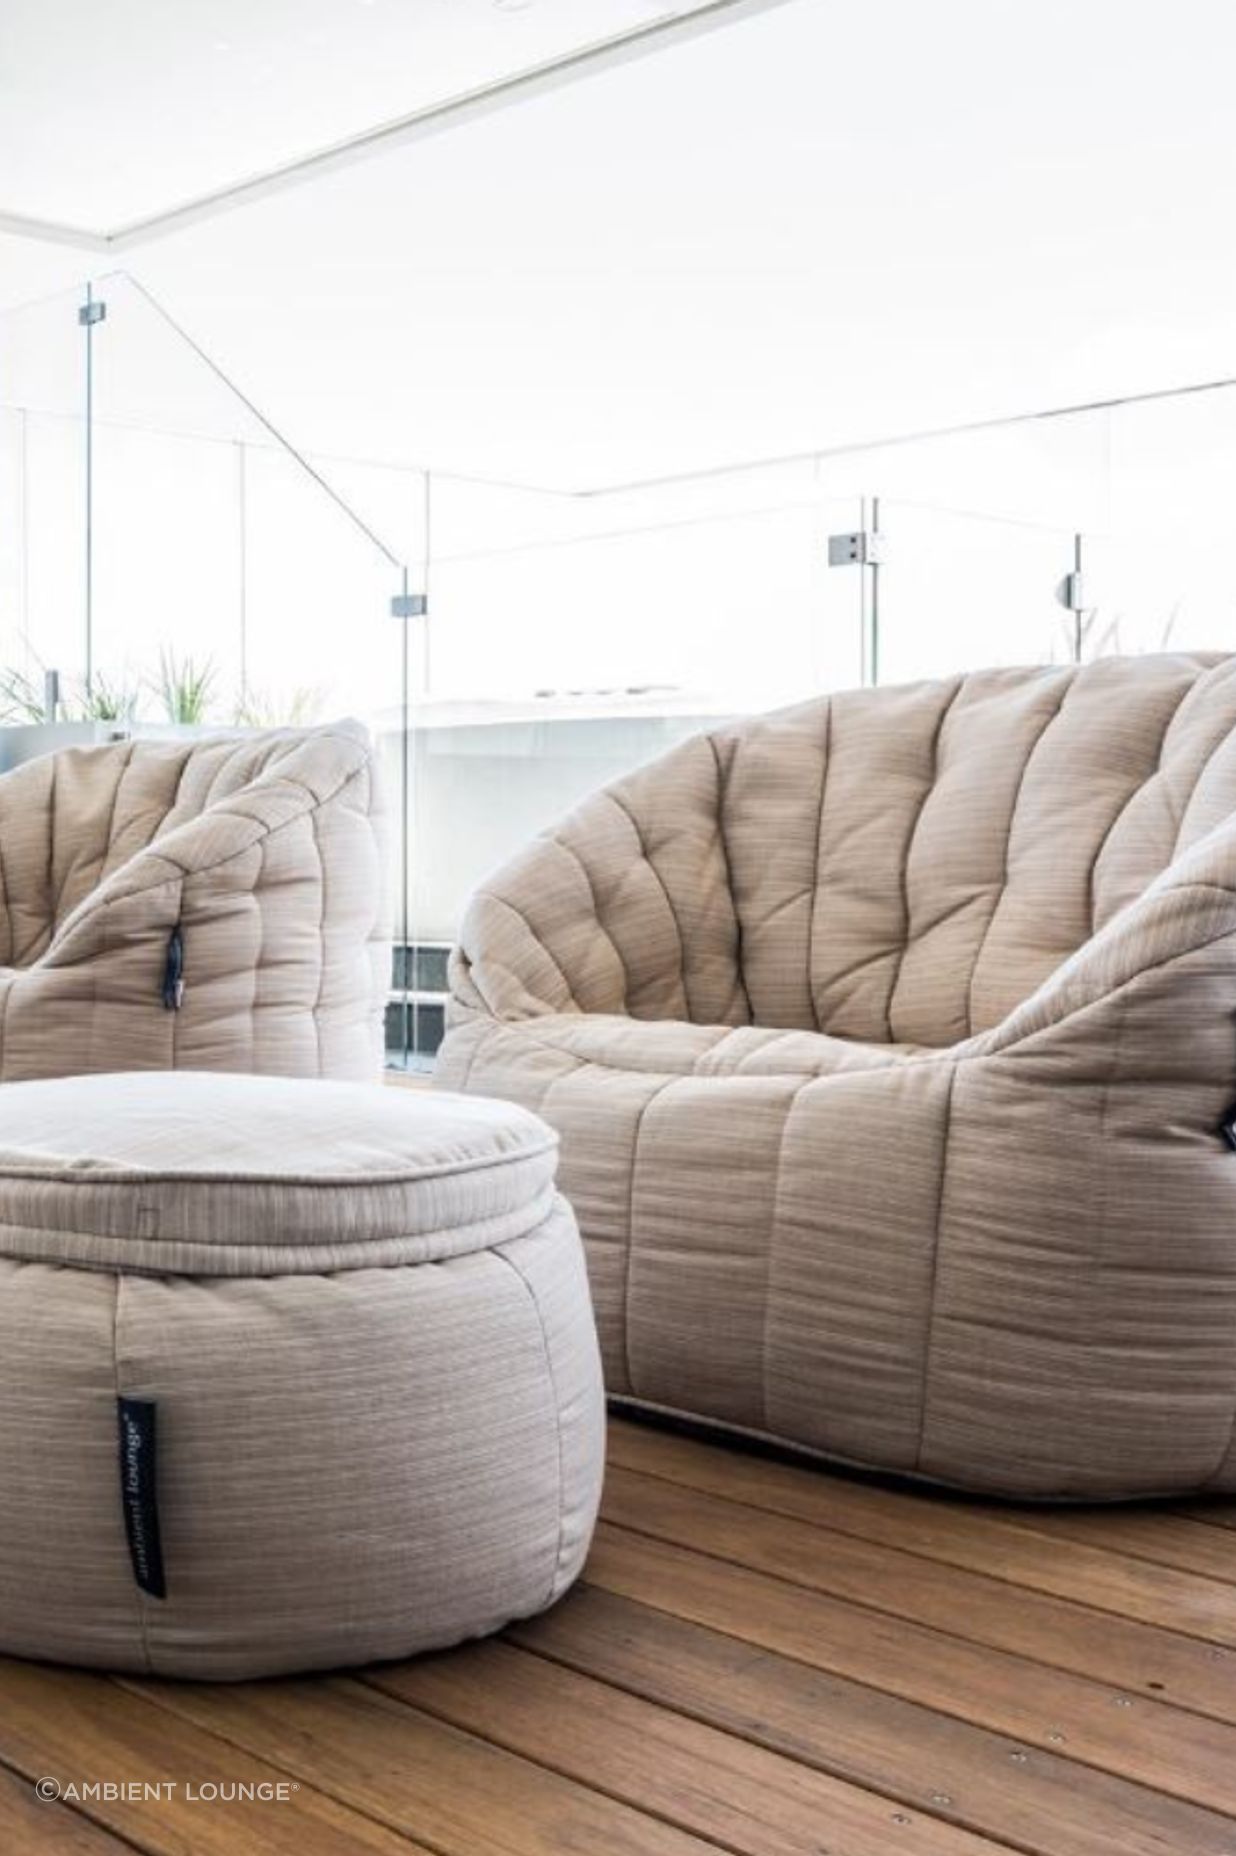 Featured on House Rules, the Butterfly sofa transforms any outdoor space into an oasis of relaxation